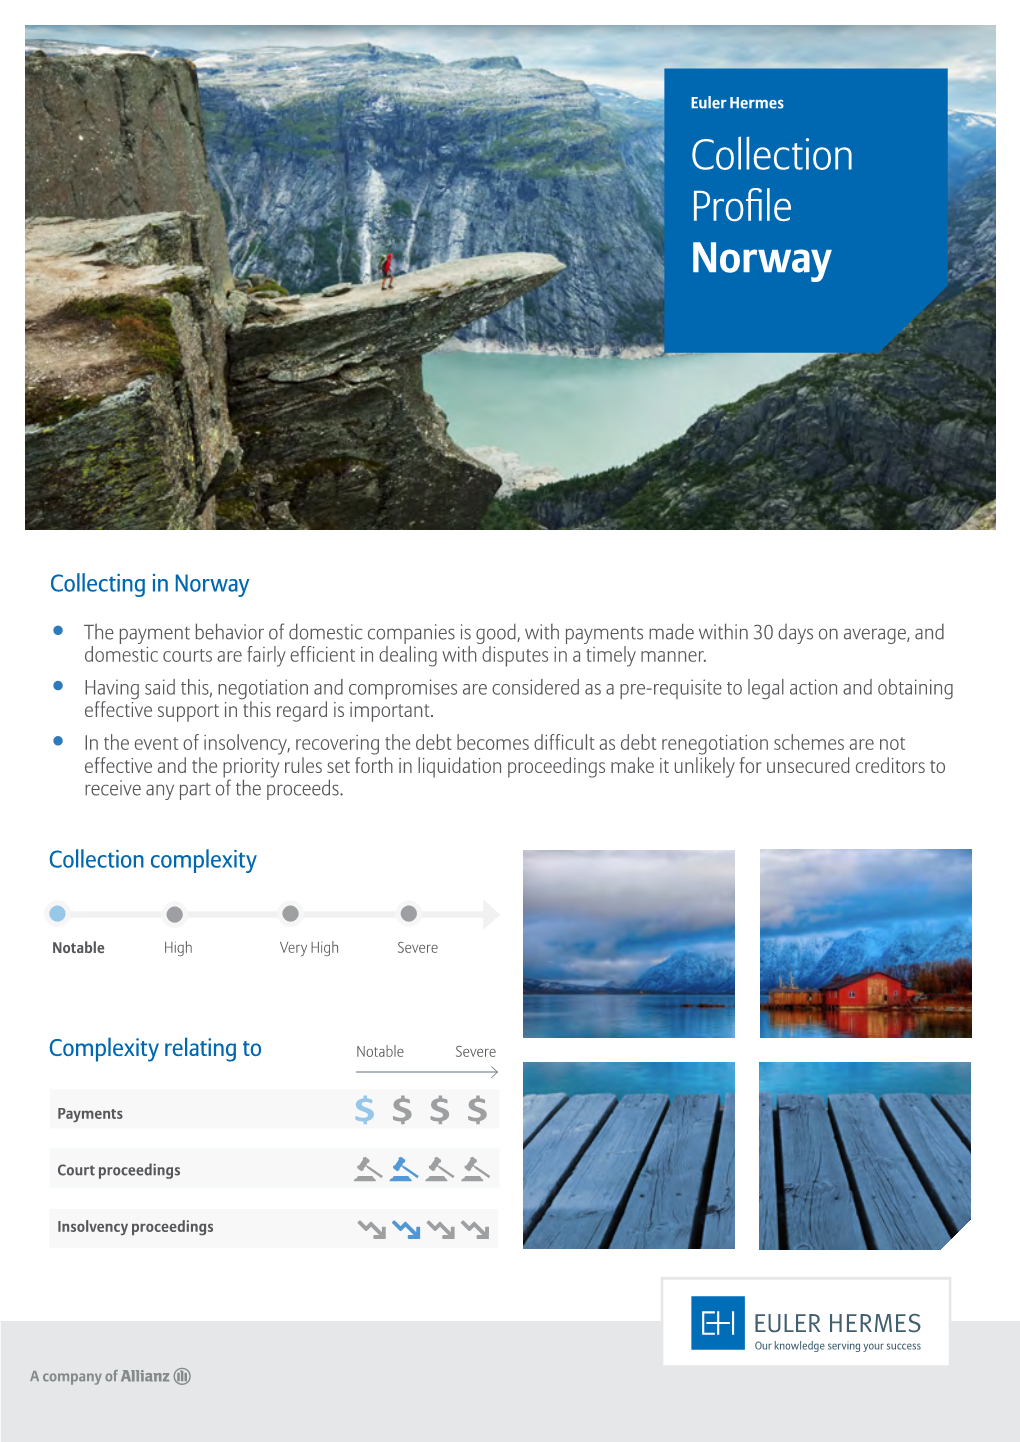 Collection Profile Norway